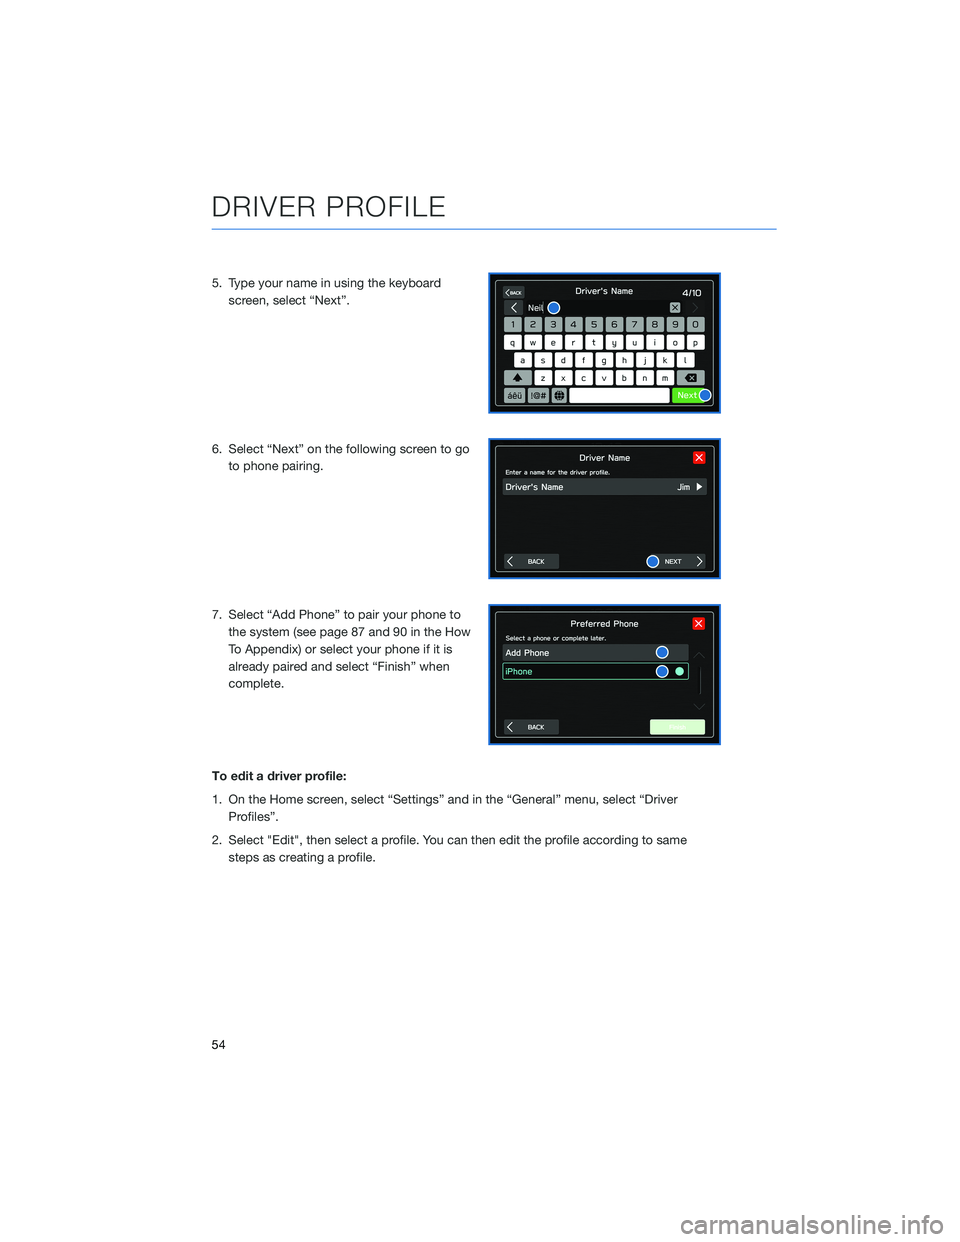 SUBARU BRZ 2022  Getting Started Guide 5. Type your name in using the keyboard
screen, select “Next”.
6. Select “Next” on the following screen to go
to phone pairing.
7. Select “Add Phone” to pair your phone to
the system (see 